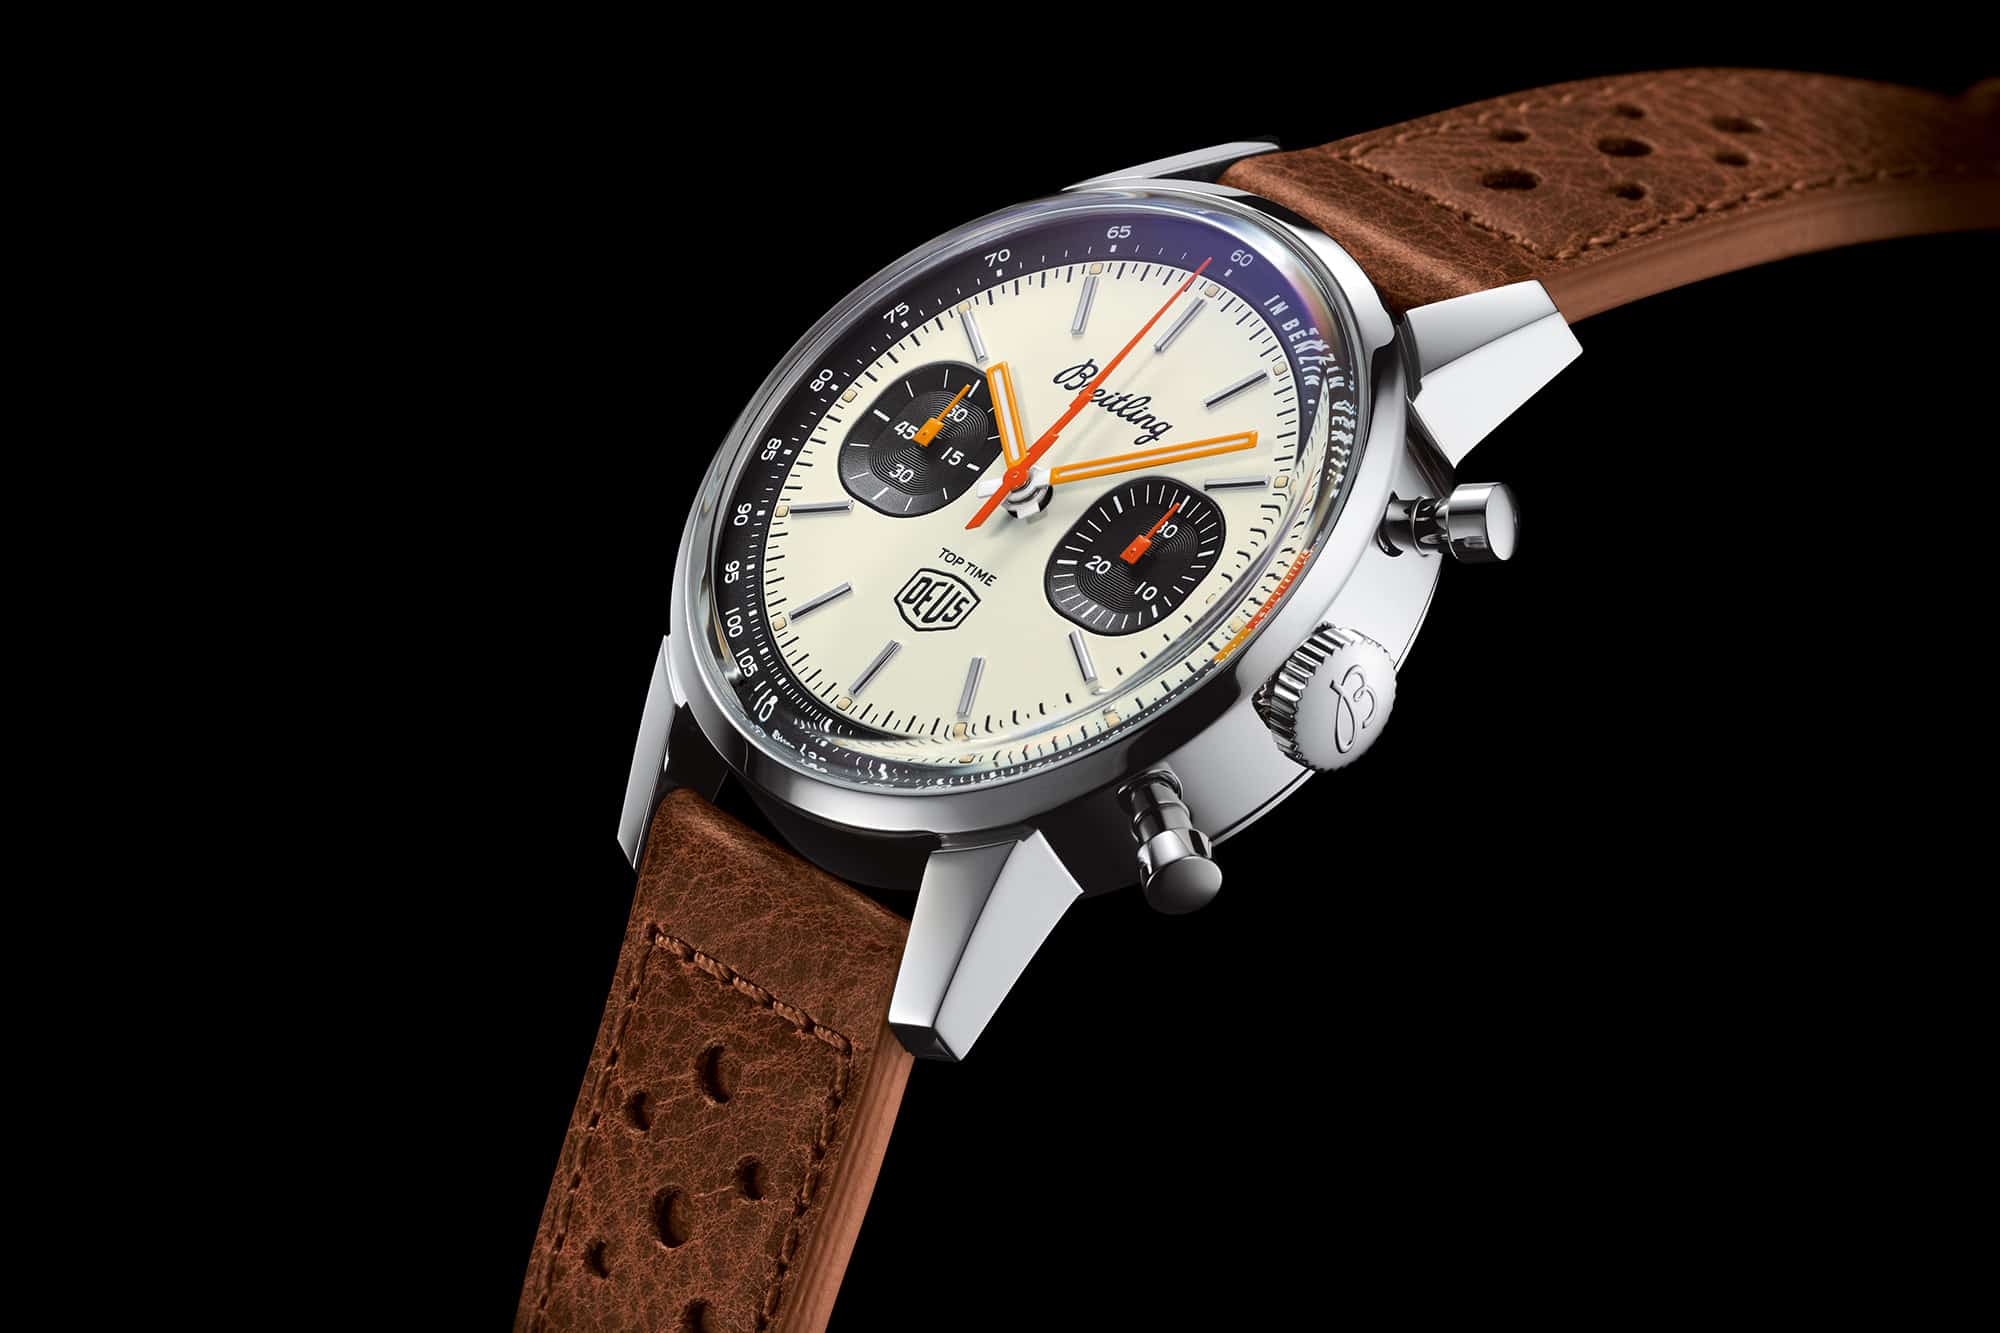 Reacting to the sold out BREITLING / DEUS TOP TIME CHRONOGRAPH